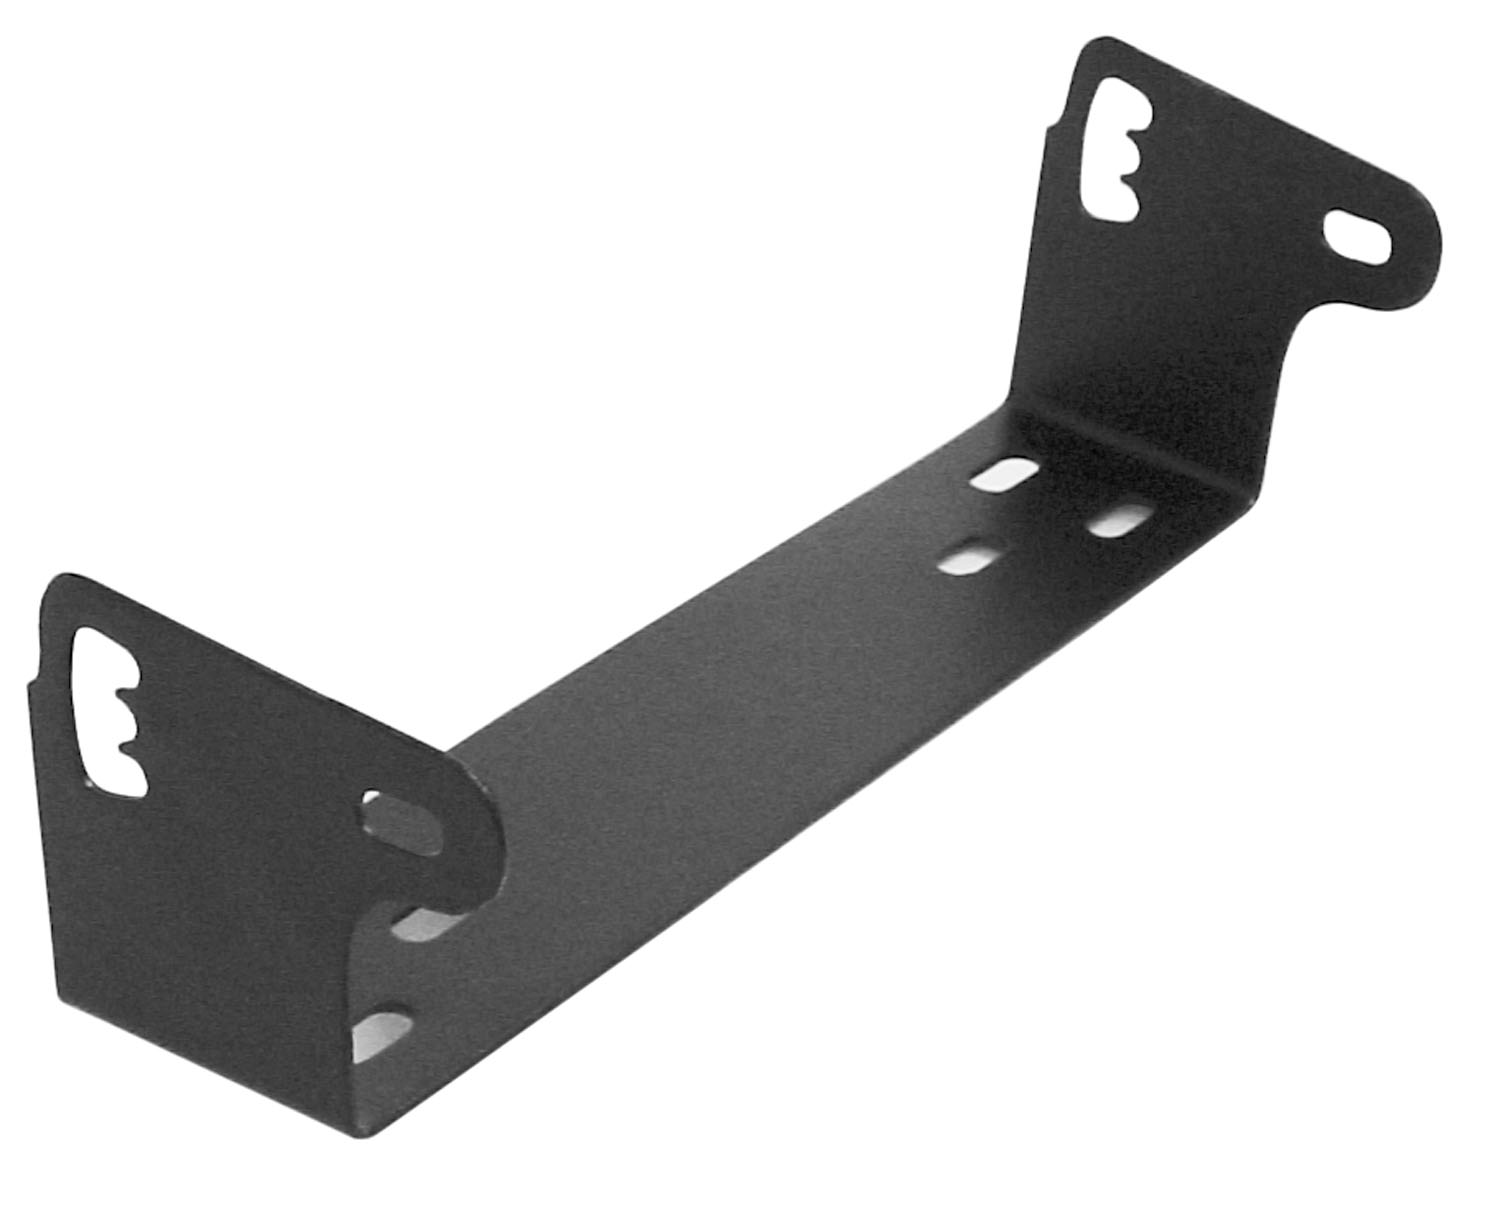 RANGER - 8-1/4" BLACK 2 HOLE REPLACEMENT MOUNTING BRACKET FOR RANGER RCI-2950, COBRA 148, UNIDEN GRANT AND OTHER RADIOS